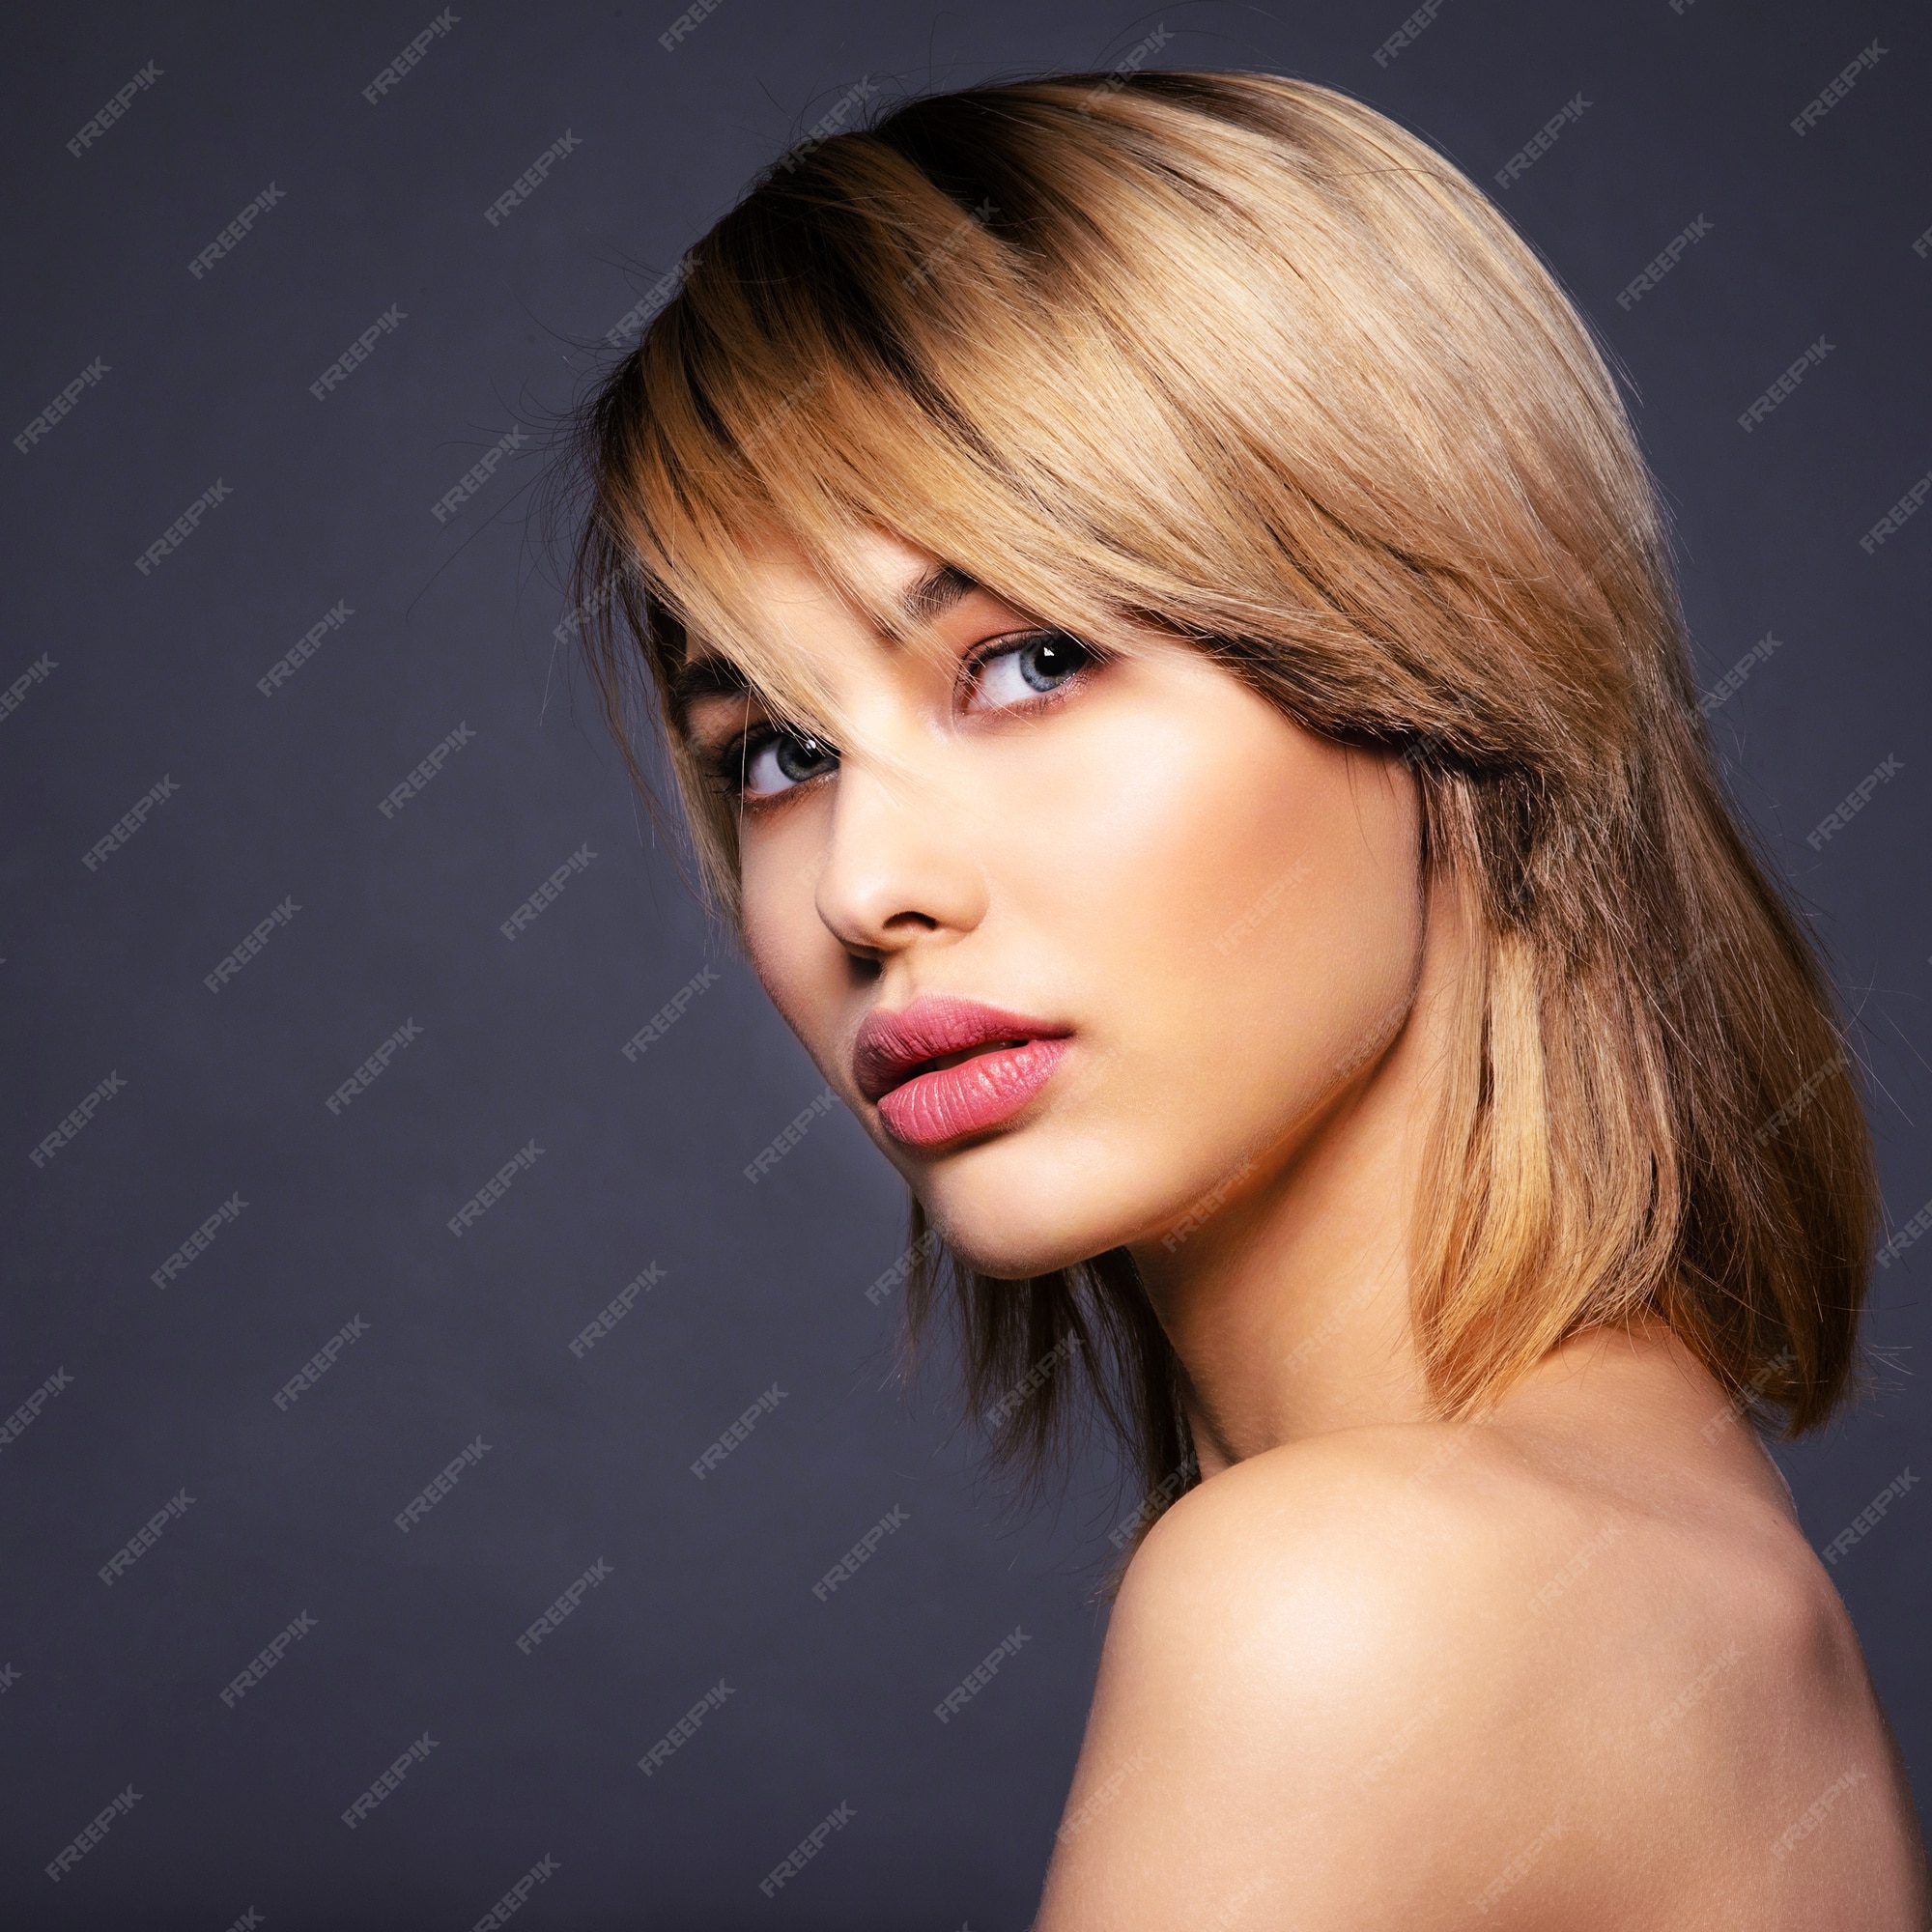 Free Photo | Blone woman with a short hair, fringe. sexy blonde woman.  attractive blond model with blue eyes. fashion model with a smokey makeup.  closeup portrait of a pretty woman. creative